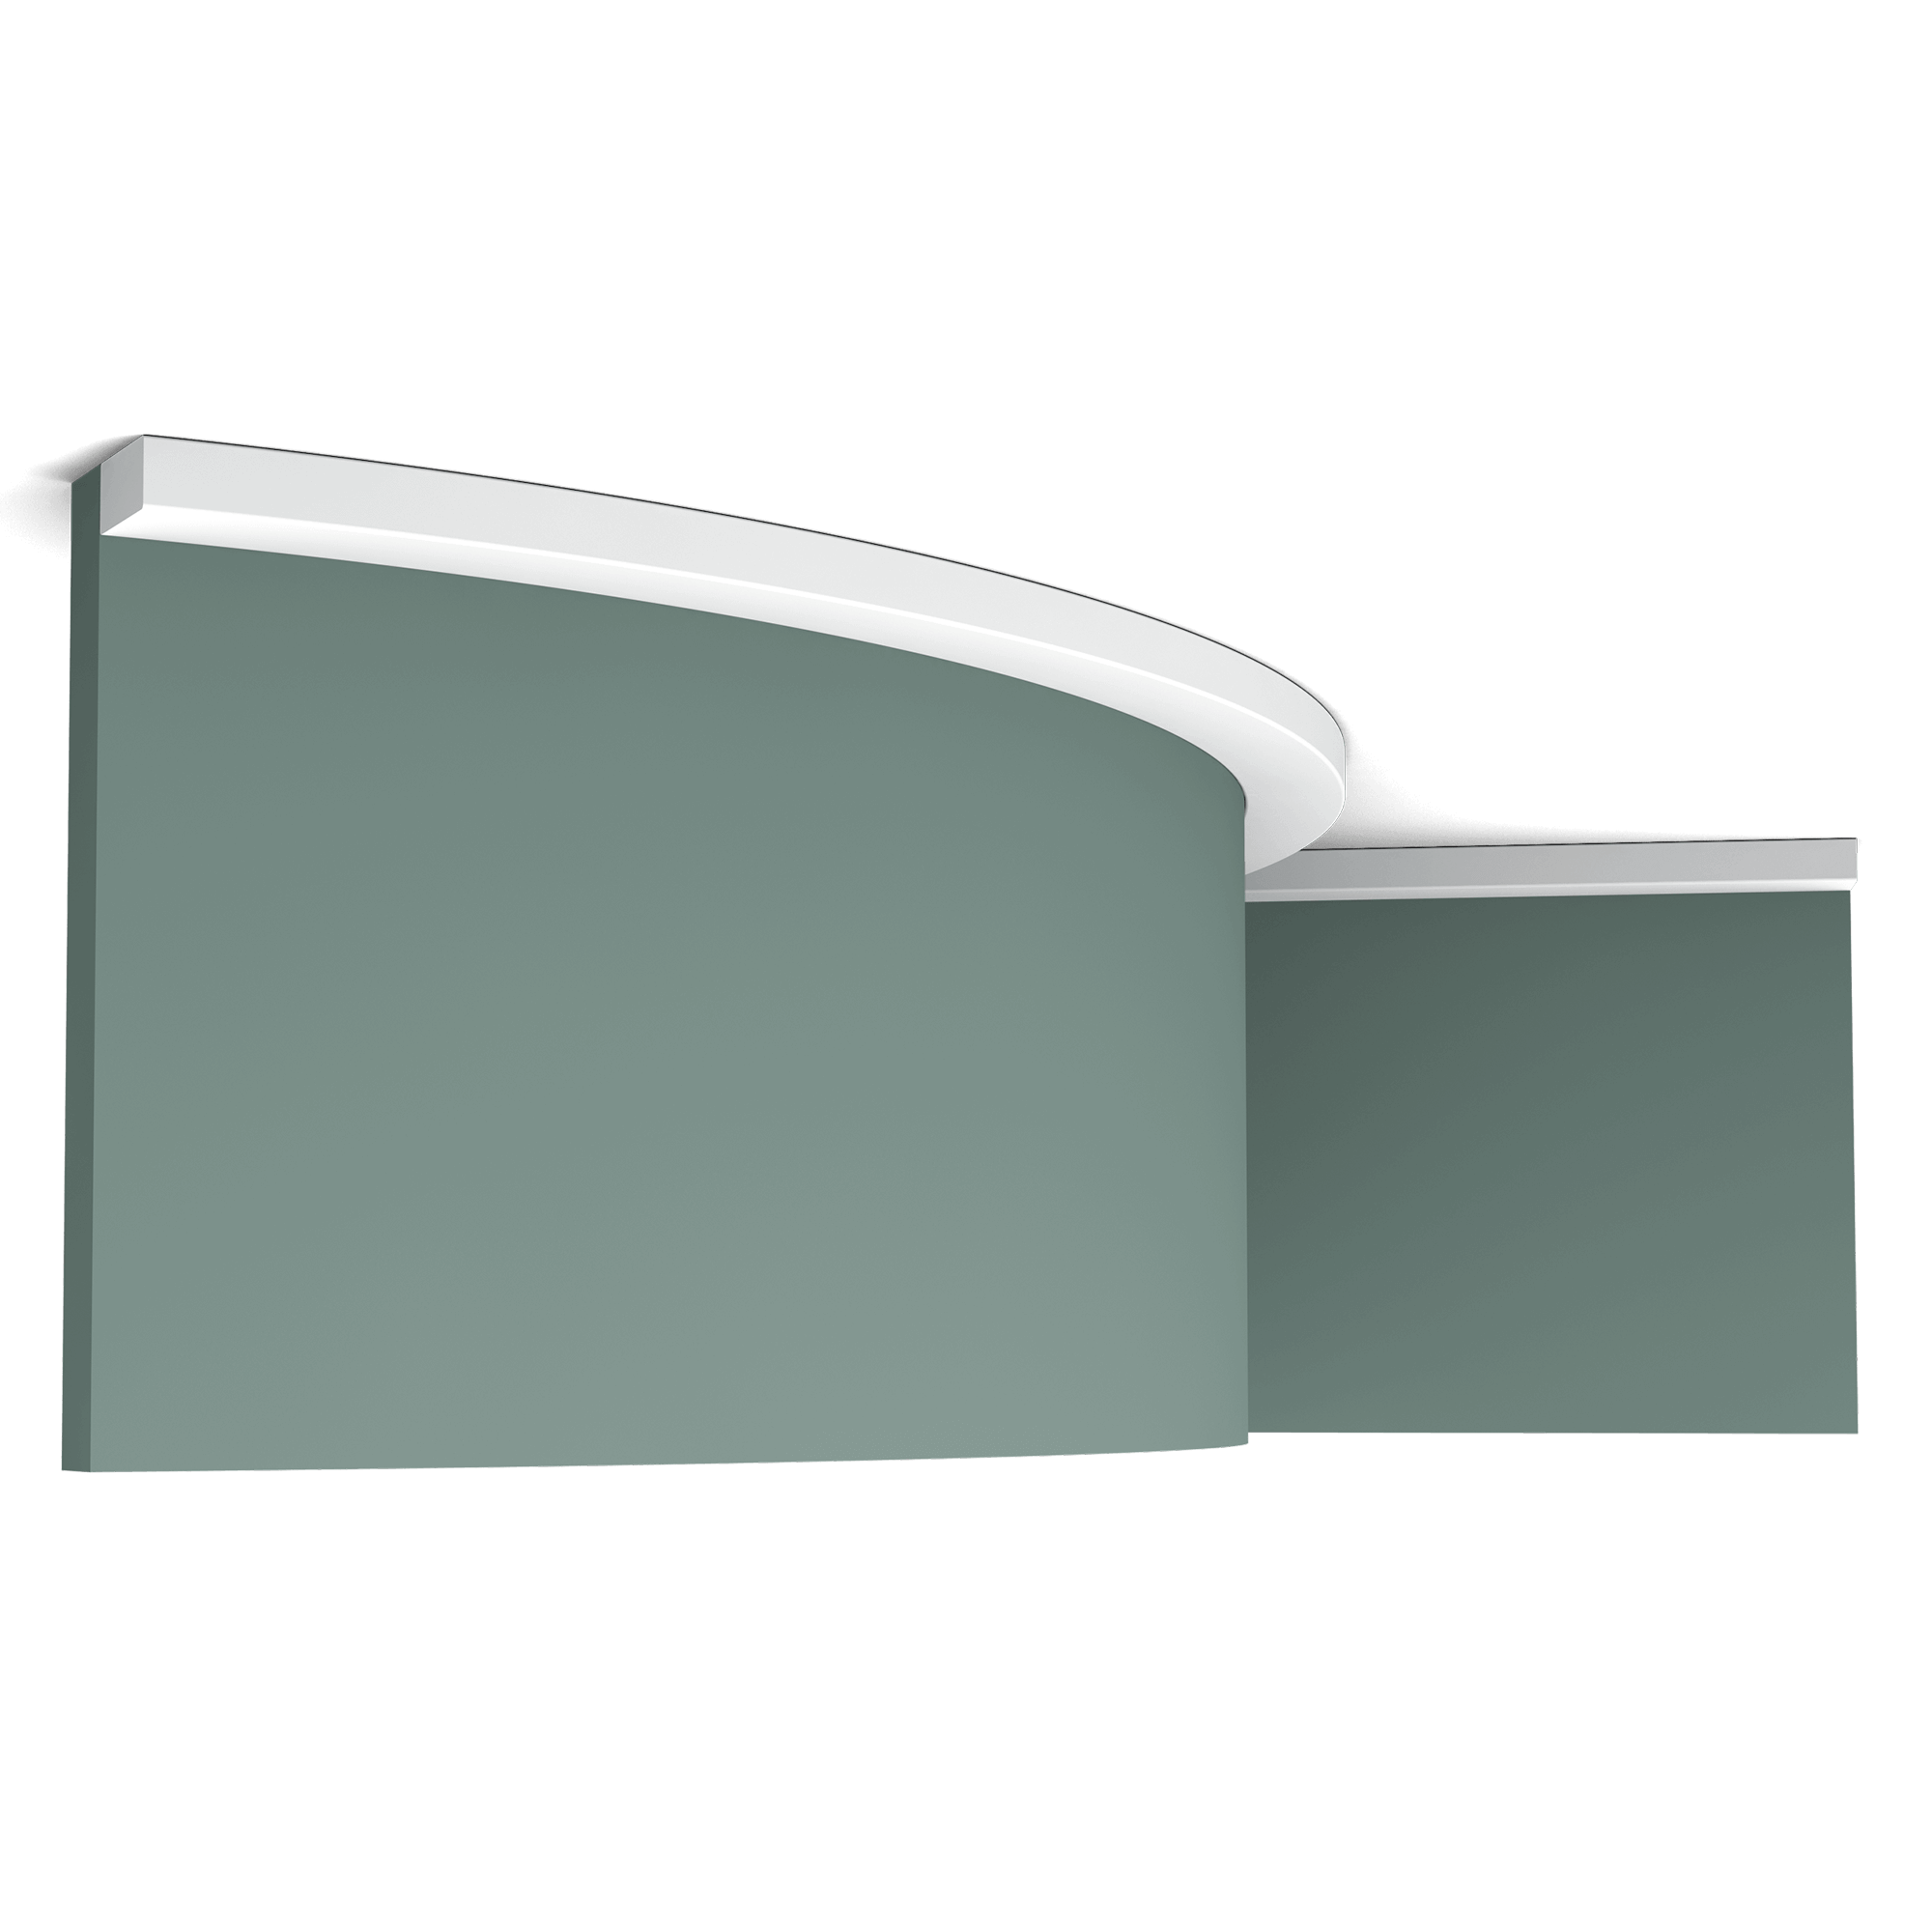 he flexible version of the SX194. The SX194 is our smallest and simplest profile and is part of the SQUARE family. This multifunctional profile can be used as panel moulding to finish a wainscoting or as a skirting board to create a subtle transition between floor and wall. Flex Radius: R min = 25 cm, R* min = 80 cm